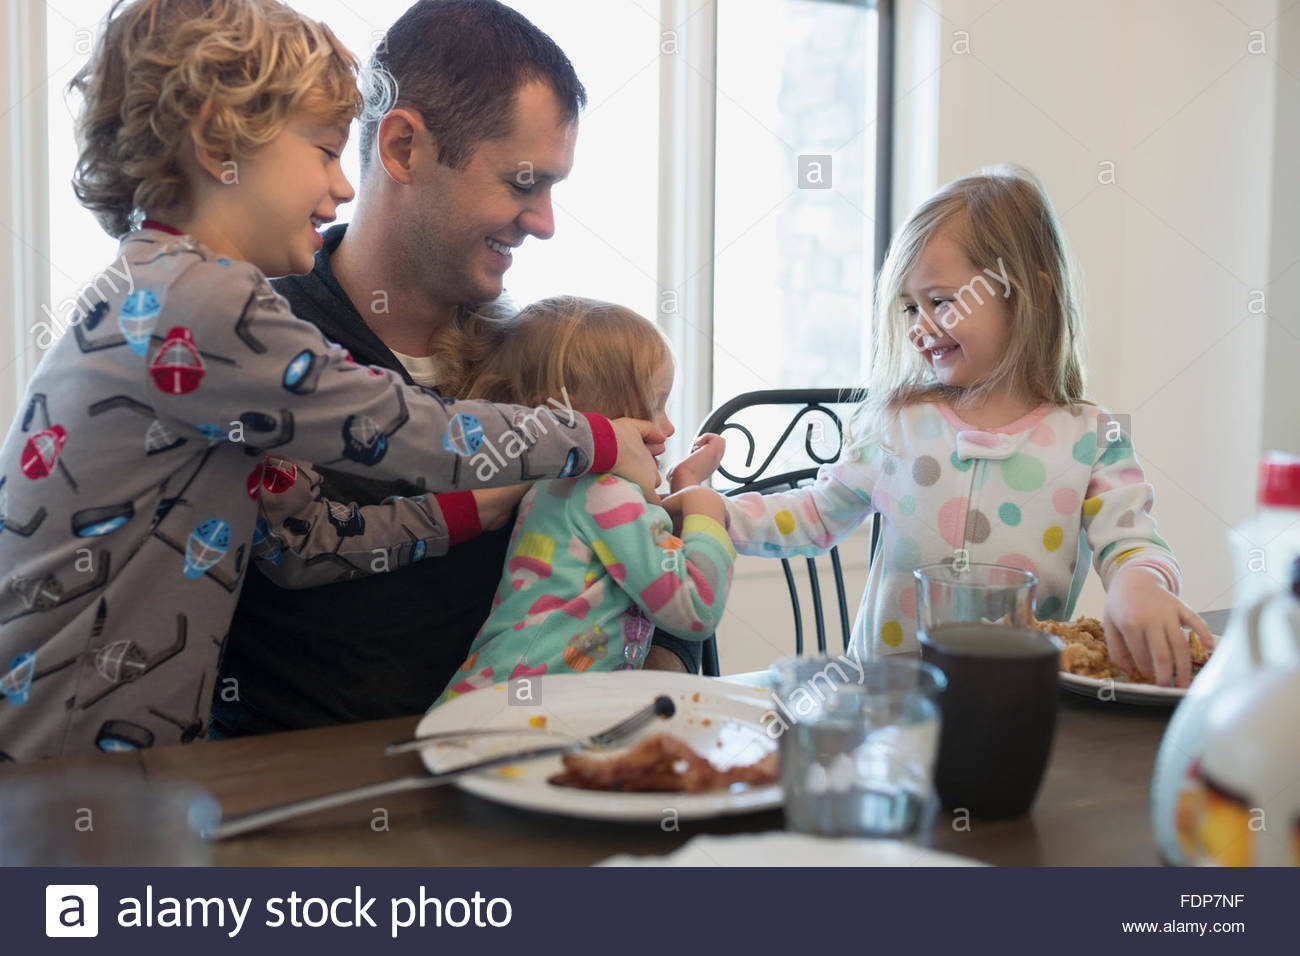 Playful father and children at breakfast table Stock Photo